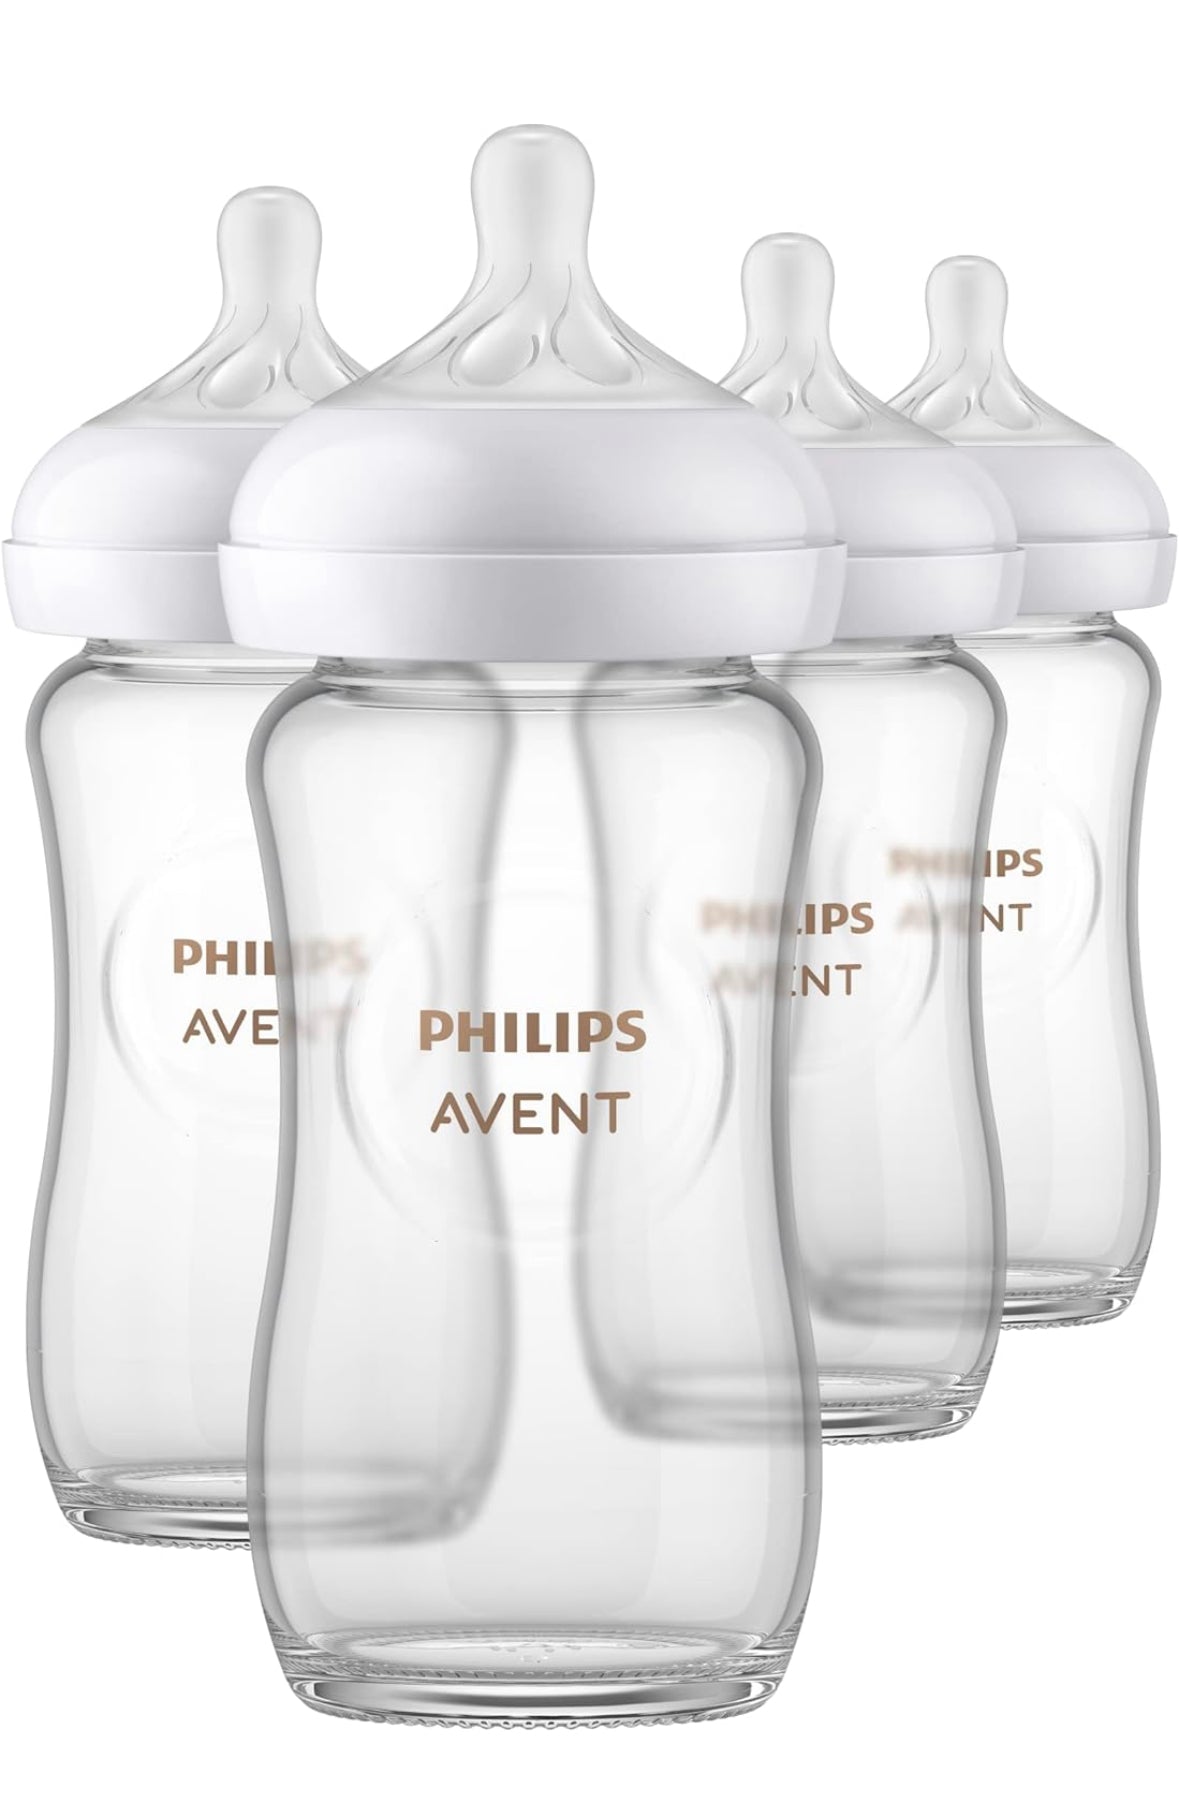 Philips AVENT Glass Natural Baby Bottle with Natural Response Nipple, Clear, 8oz, 4pk